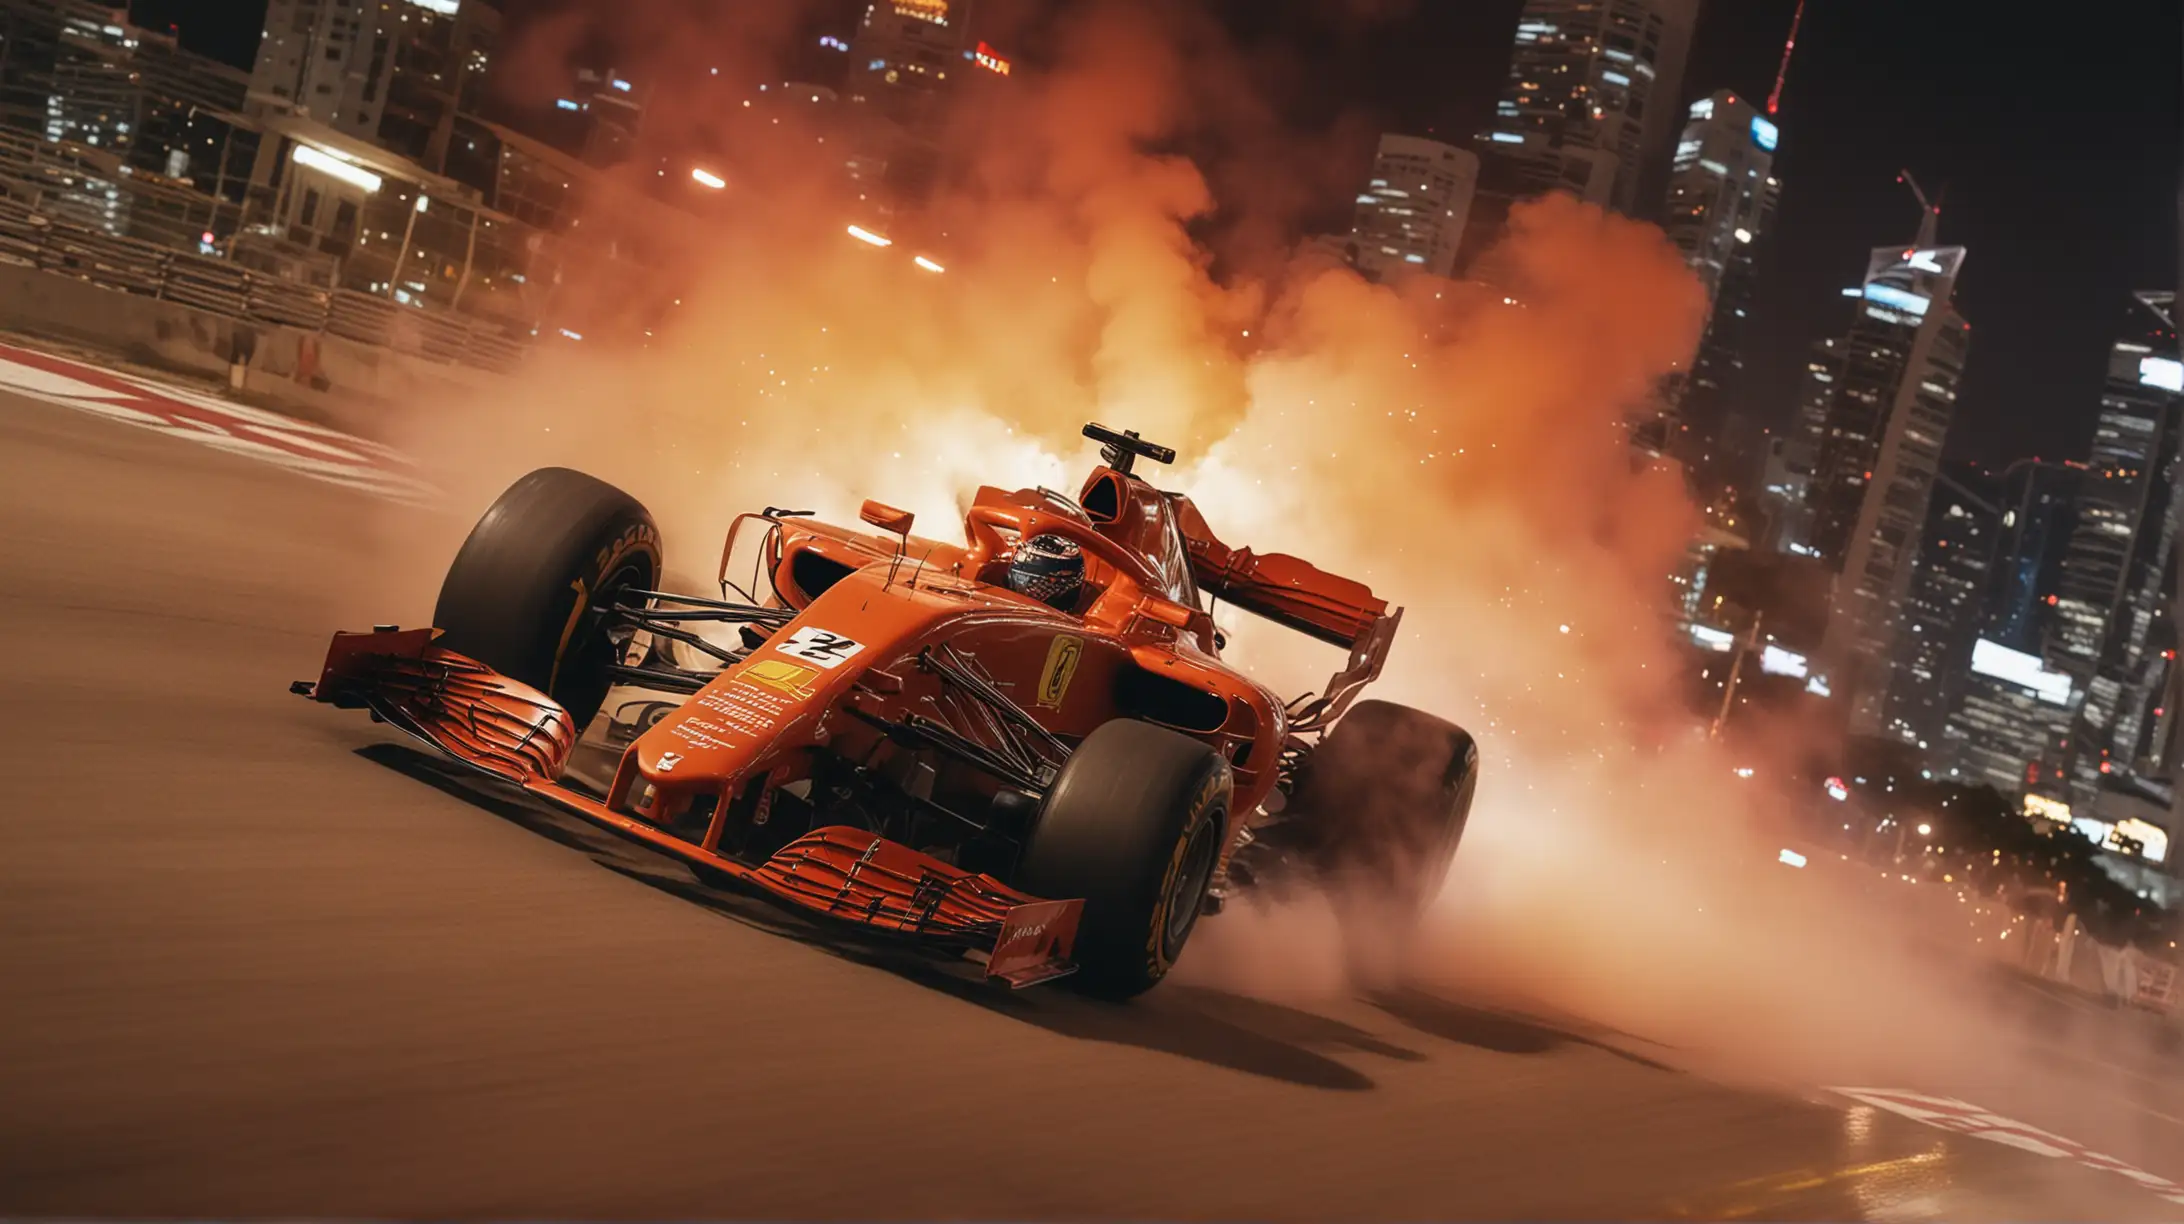 [bird eyes view,Red Ferrari  F1 racing at night in Singapore, strong speed smoke ],  sky ablaze with red and orange, cinematic style, Kodak Vision3 500T 5219, inspired and dreamy mood, warm color grading